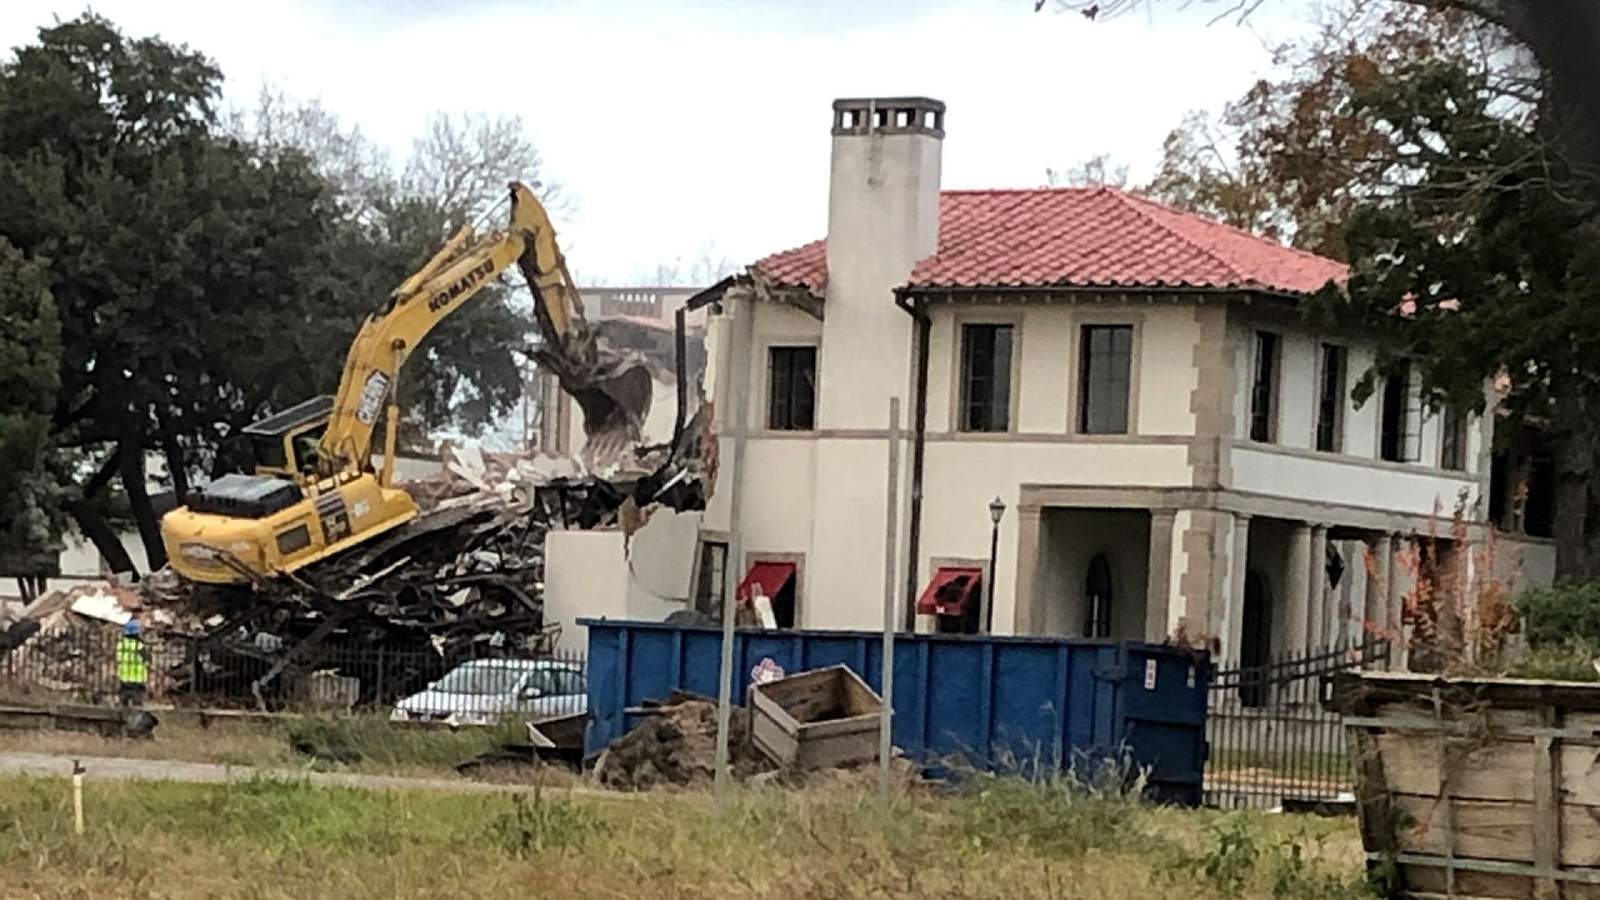 Mayor: City ‘bound by law’ to approve West Mansion demolition